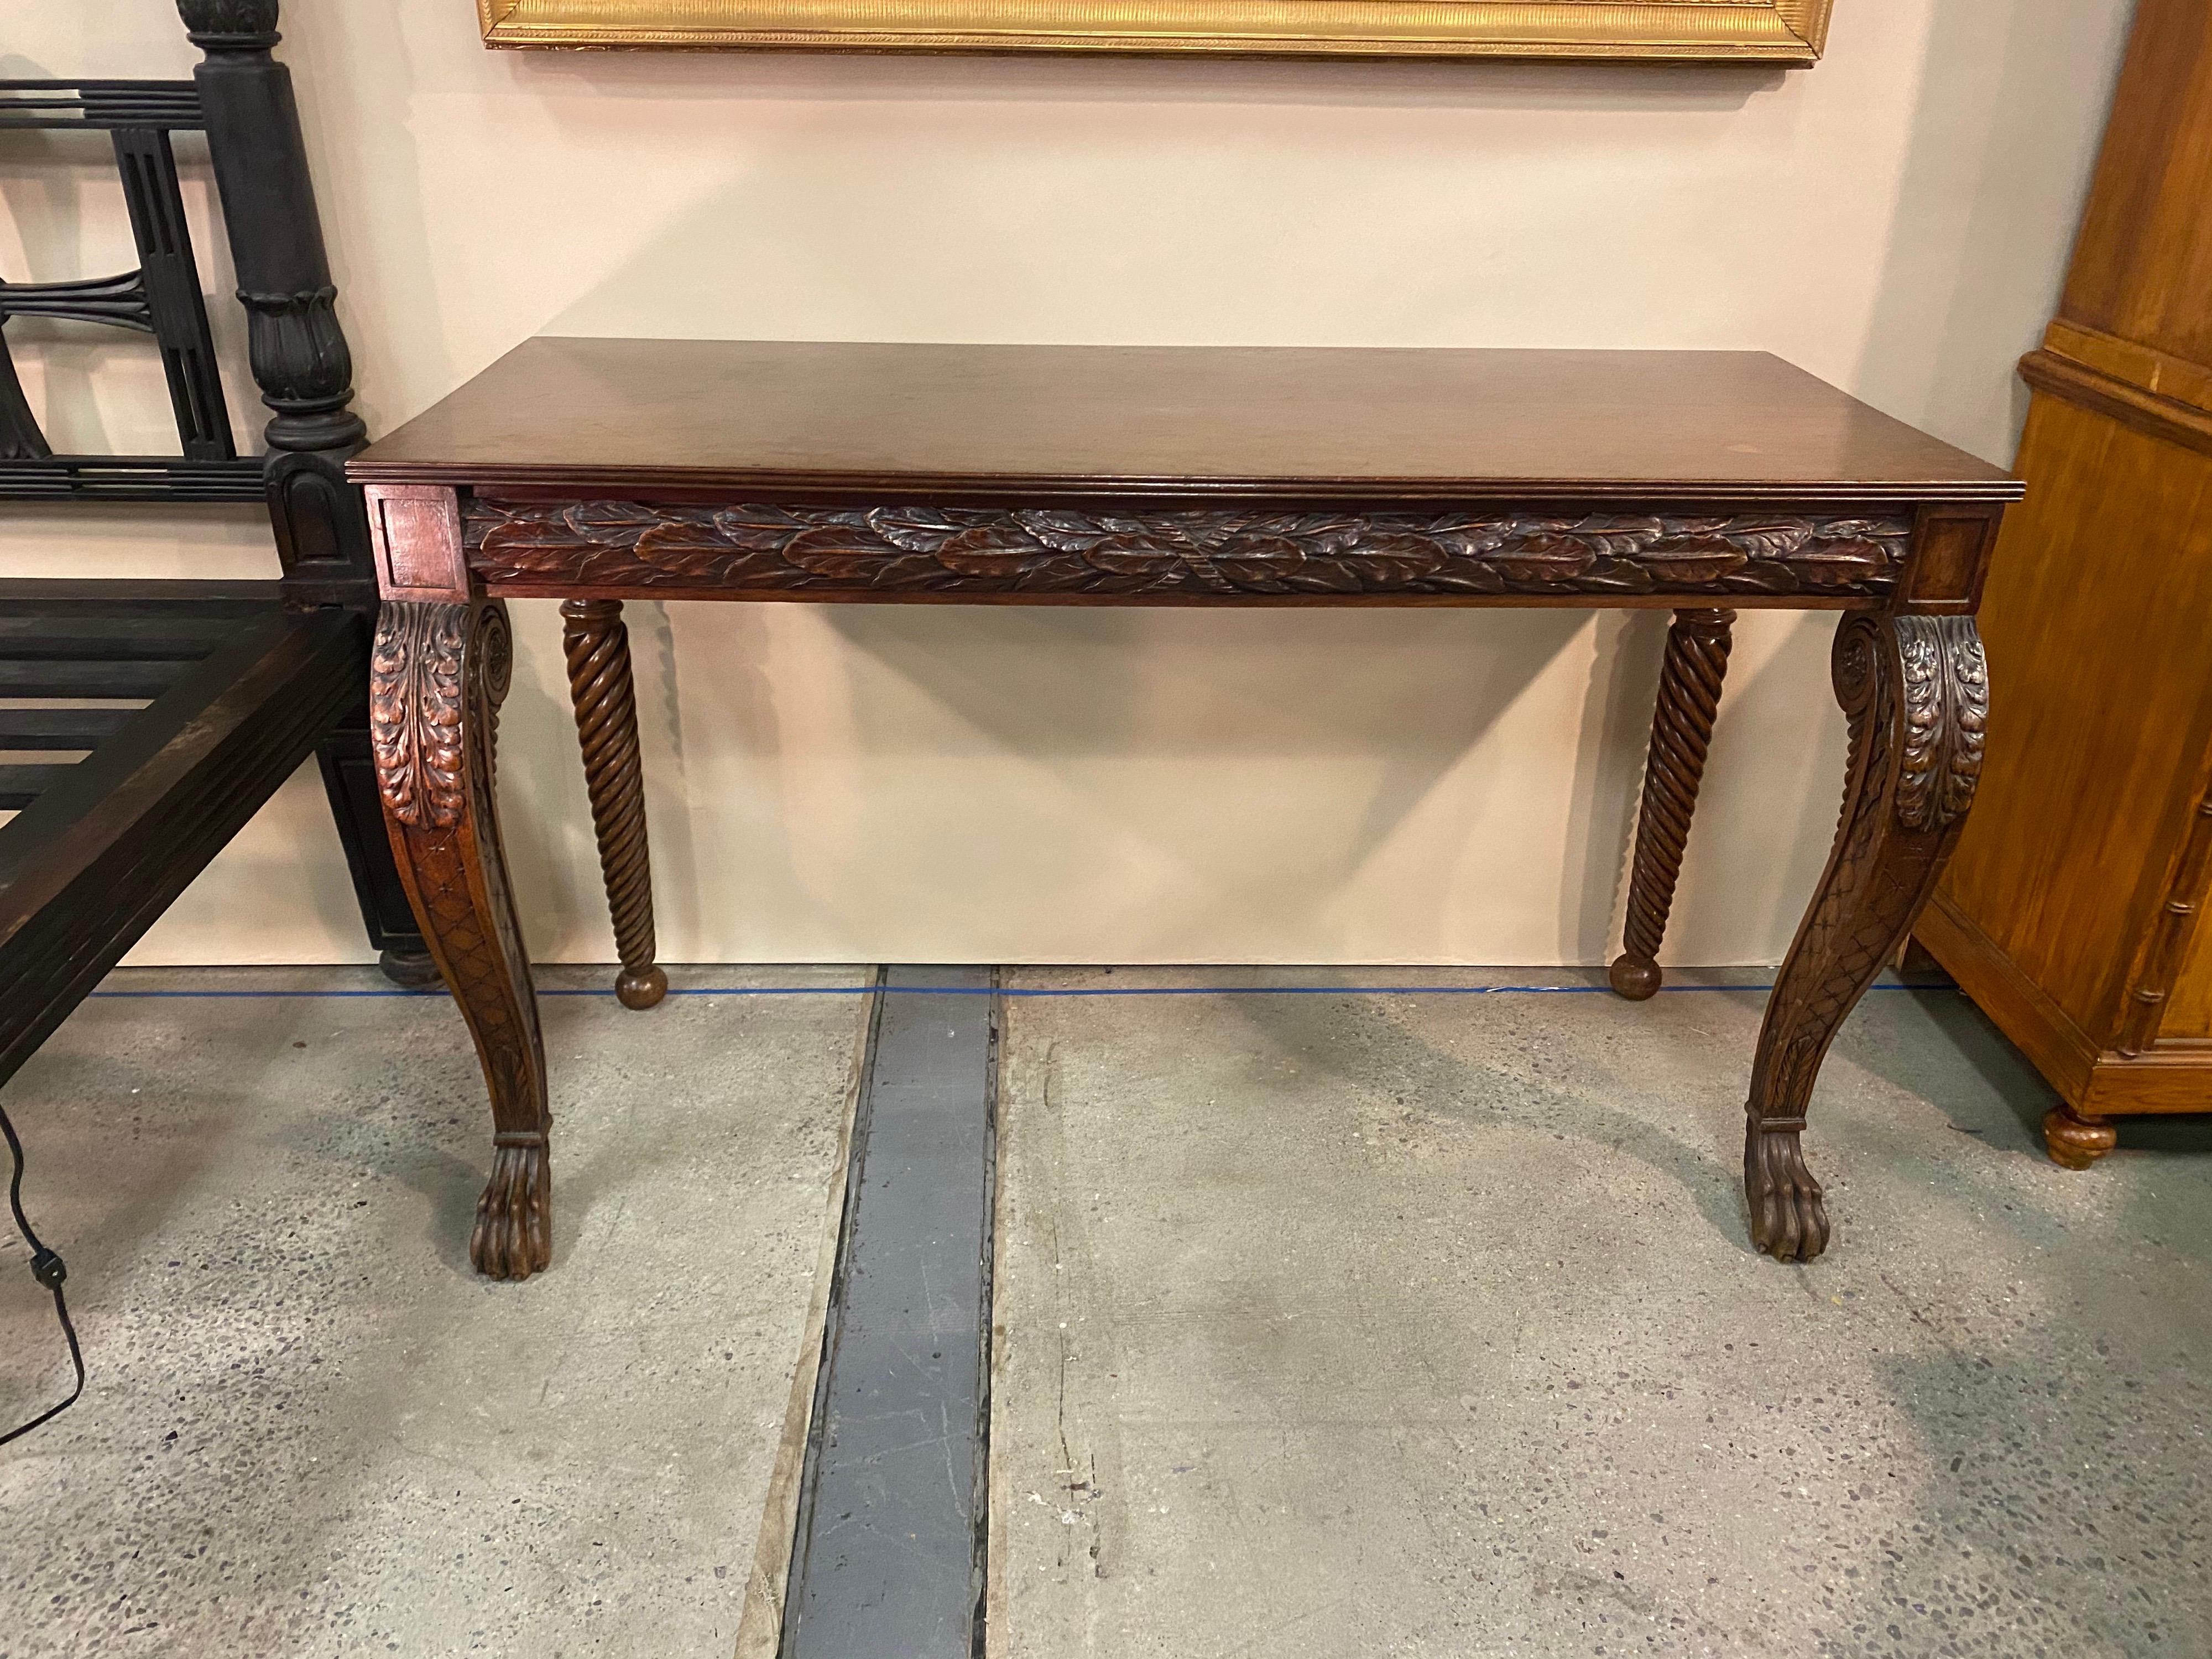 Great 19th century Irish carved mahogany console with oak leaves and paw feet. Highly carved legs and apron.